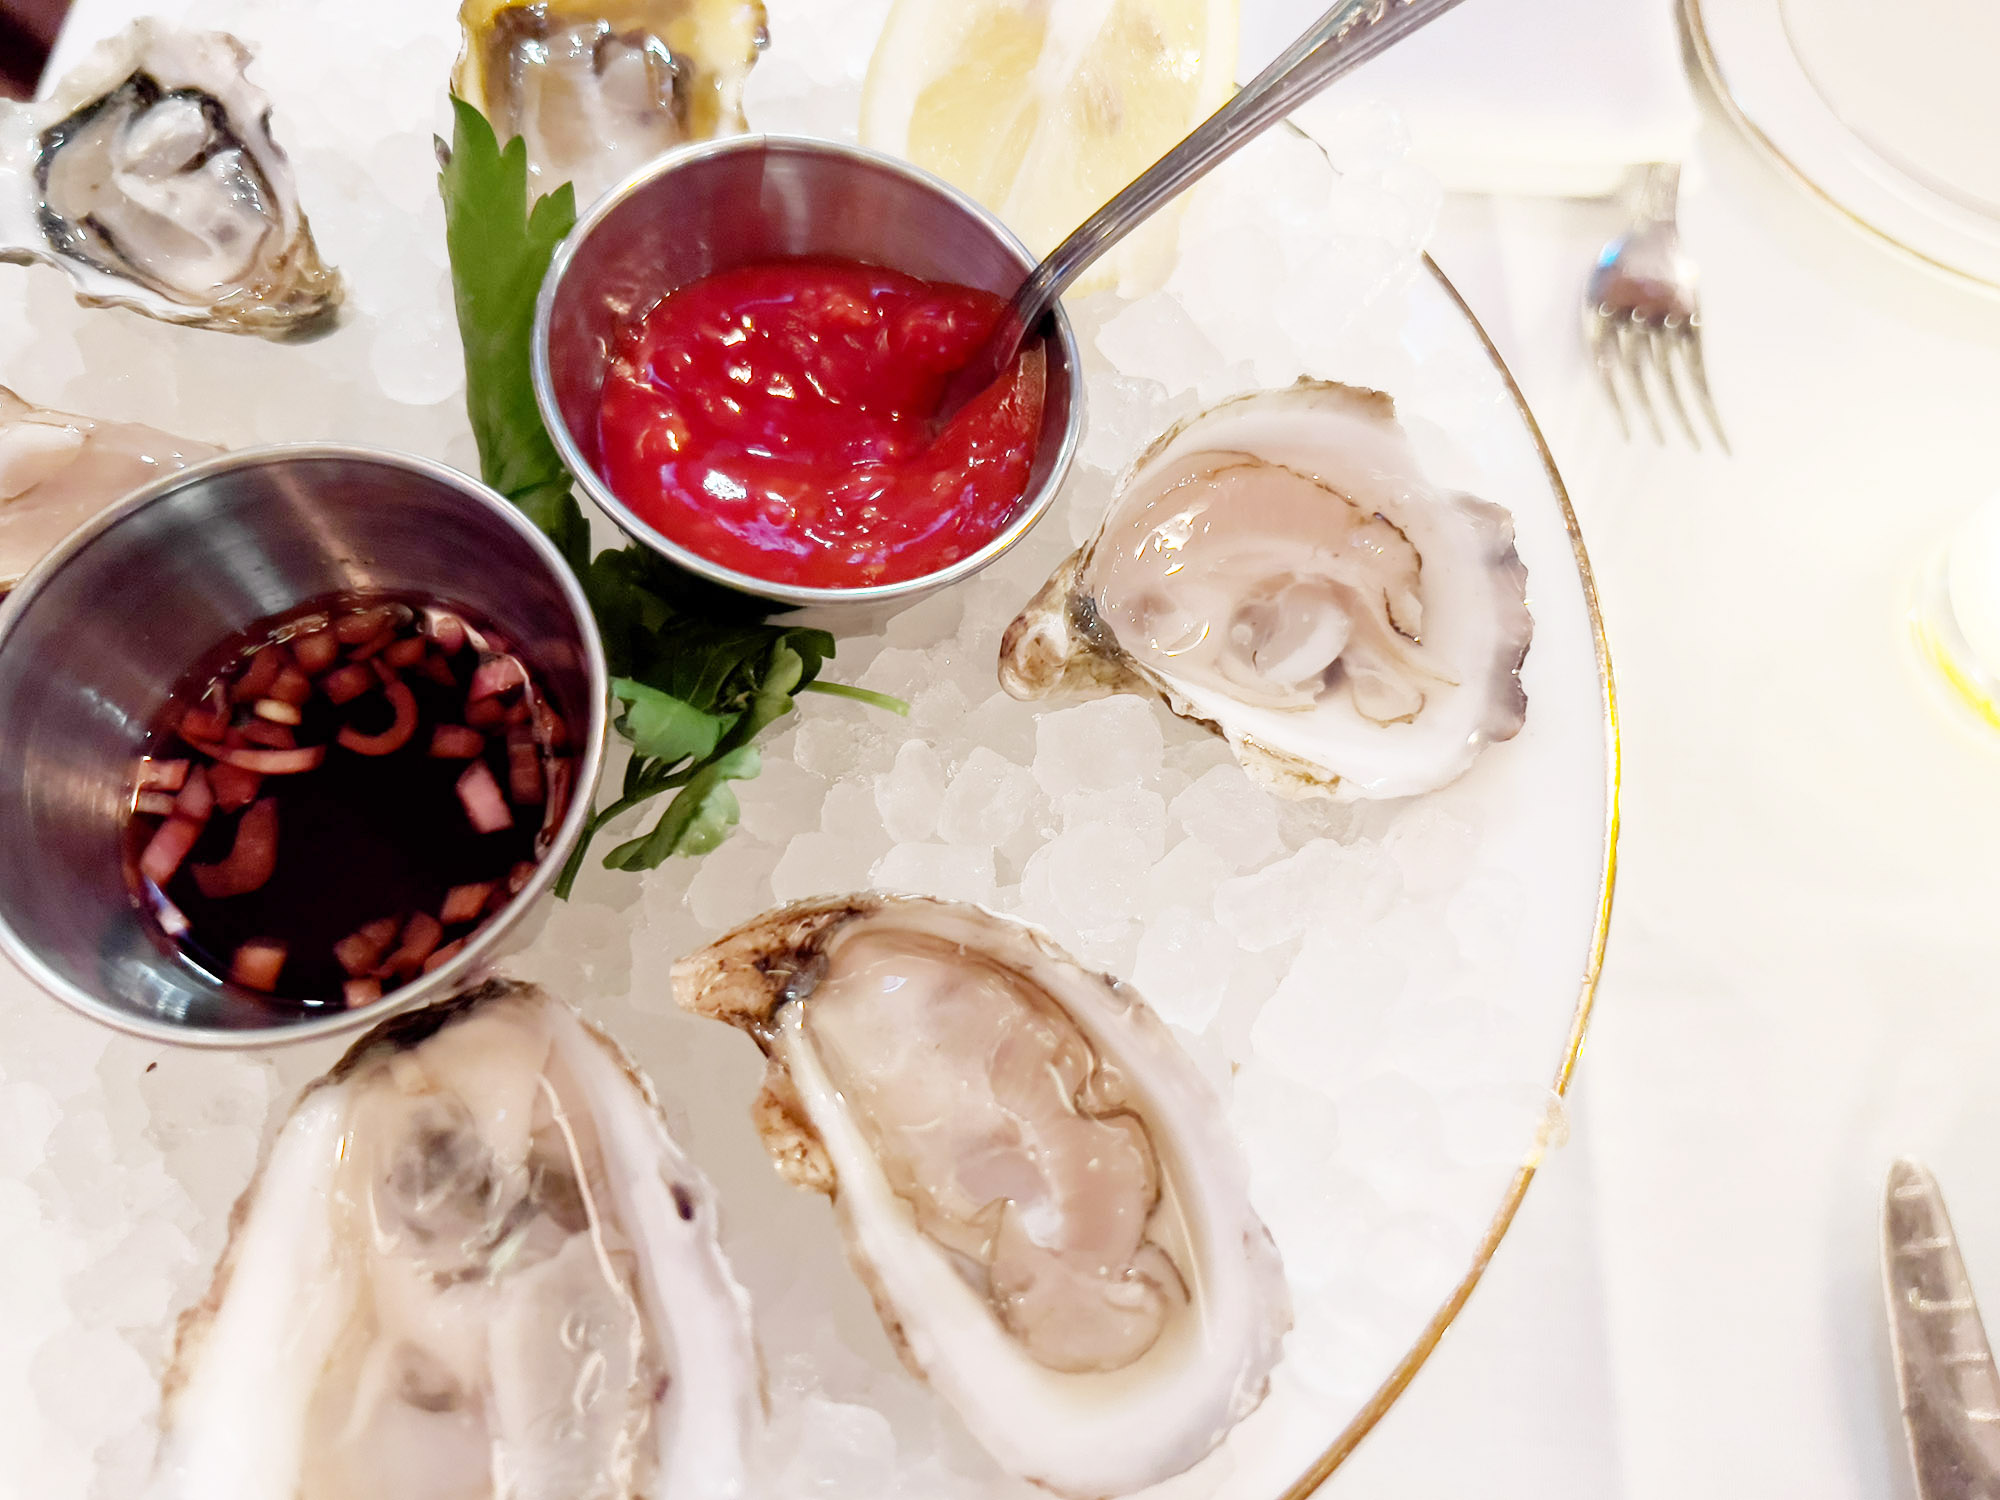 NYC: La Grande Boucherie - Oysters, steak frites and hot tea